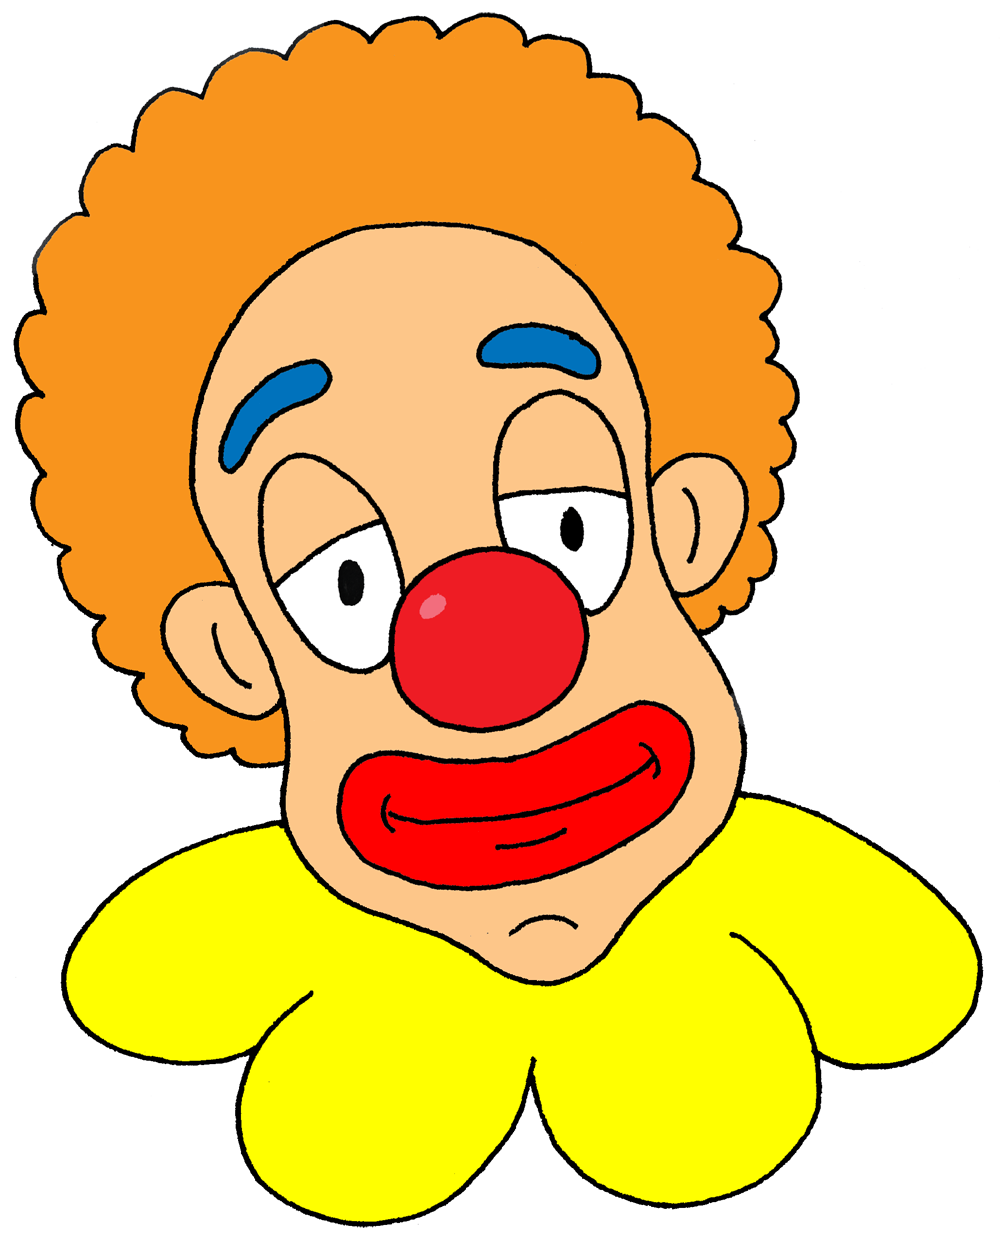 Image of clown face clipart 9 free clown clipart 1 page of 3.